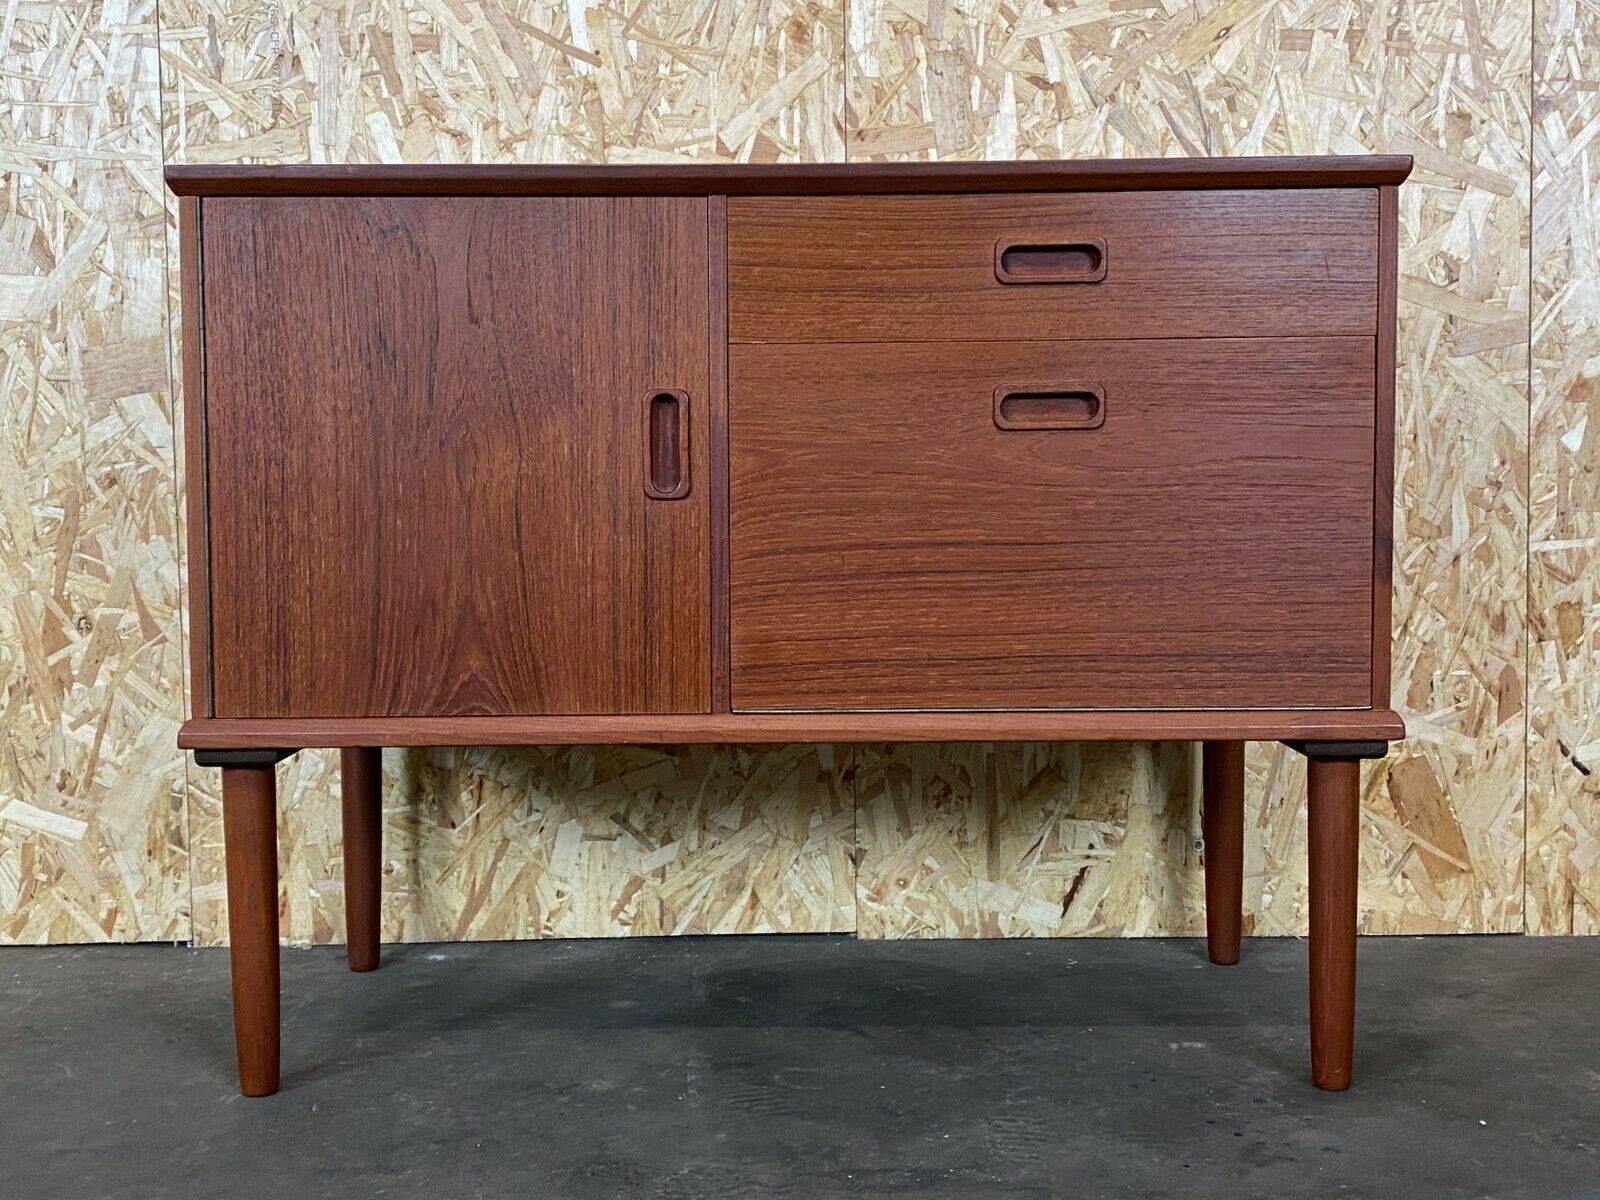 60s 70s teak sideboard Credenza cabinet Danish Modern Design Denmark 70s

Object: sideboard

Manufacturer:

Condition: good

Age: around 1960-1970

Dimensions:

85cm x 40cm x 66cm

Other notes:

The pictures serve as part of the